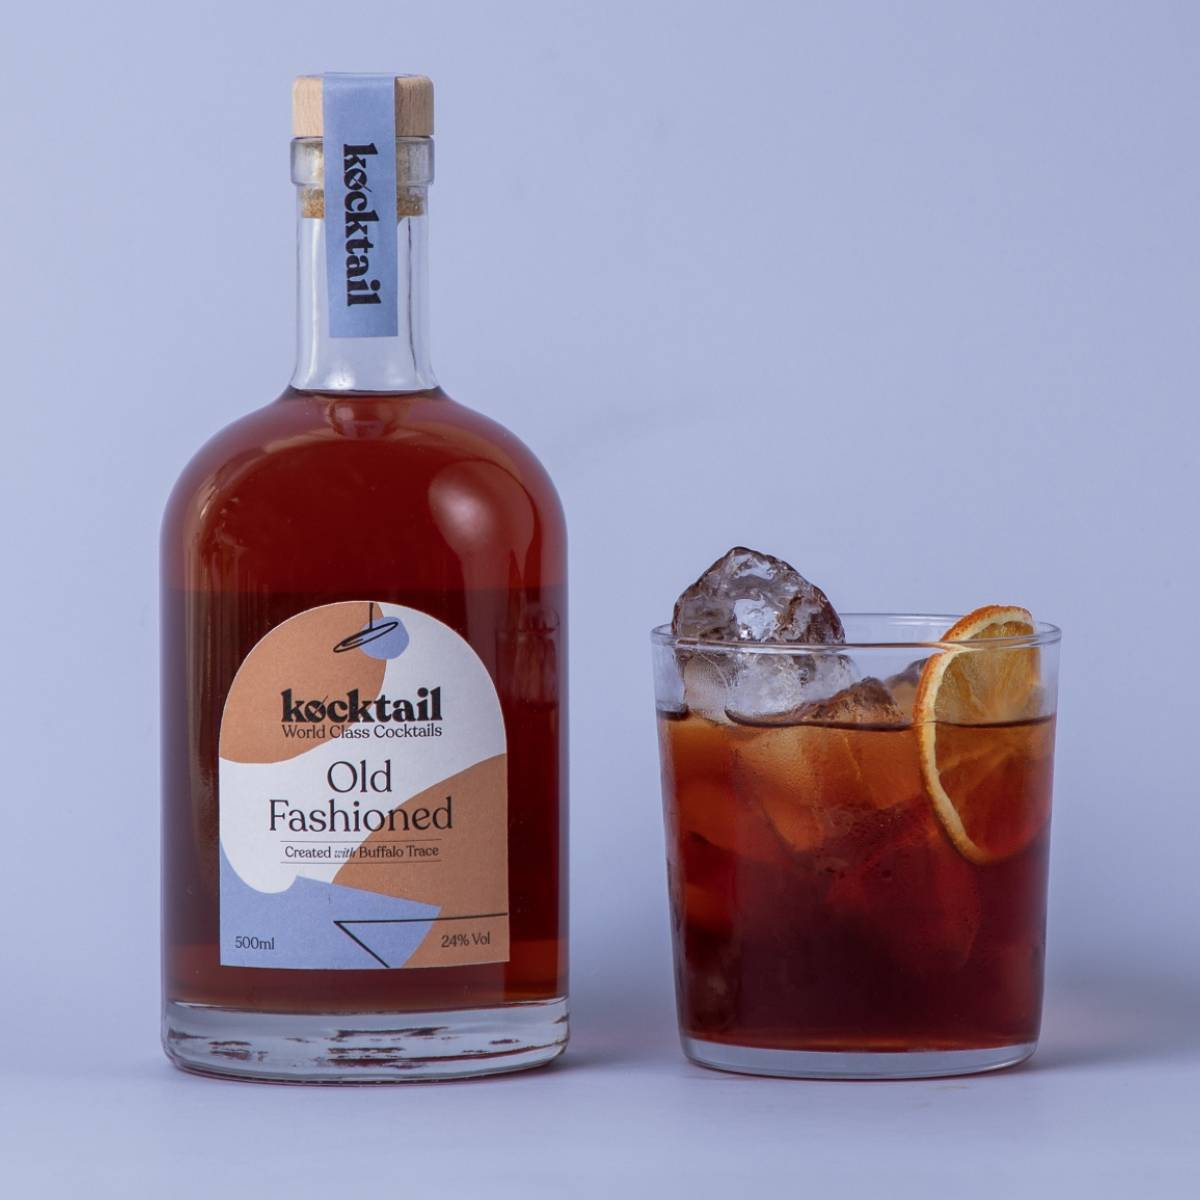 Old Fashioned cocktail and bottle on blue background